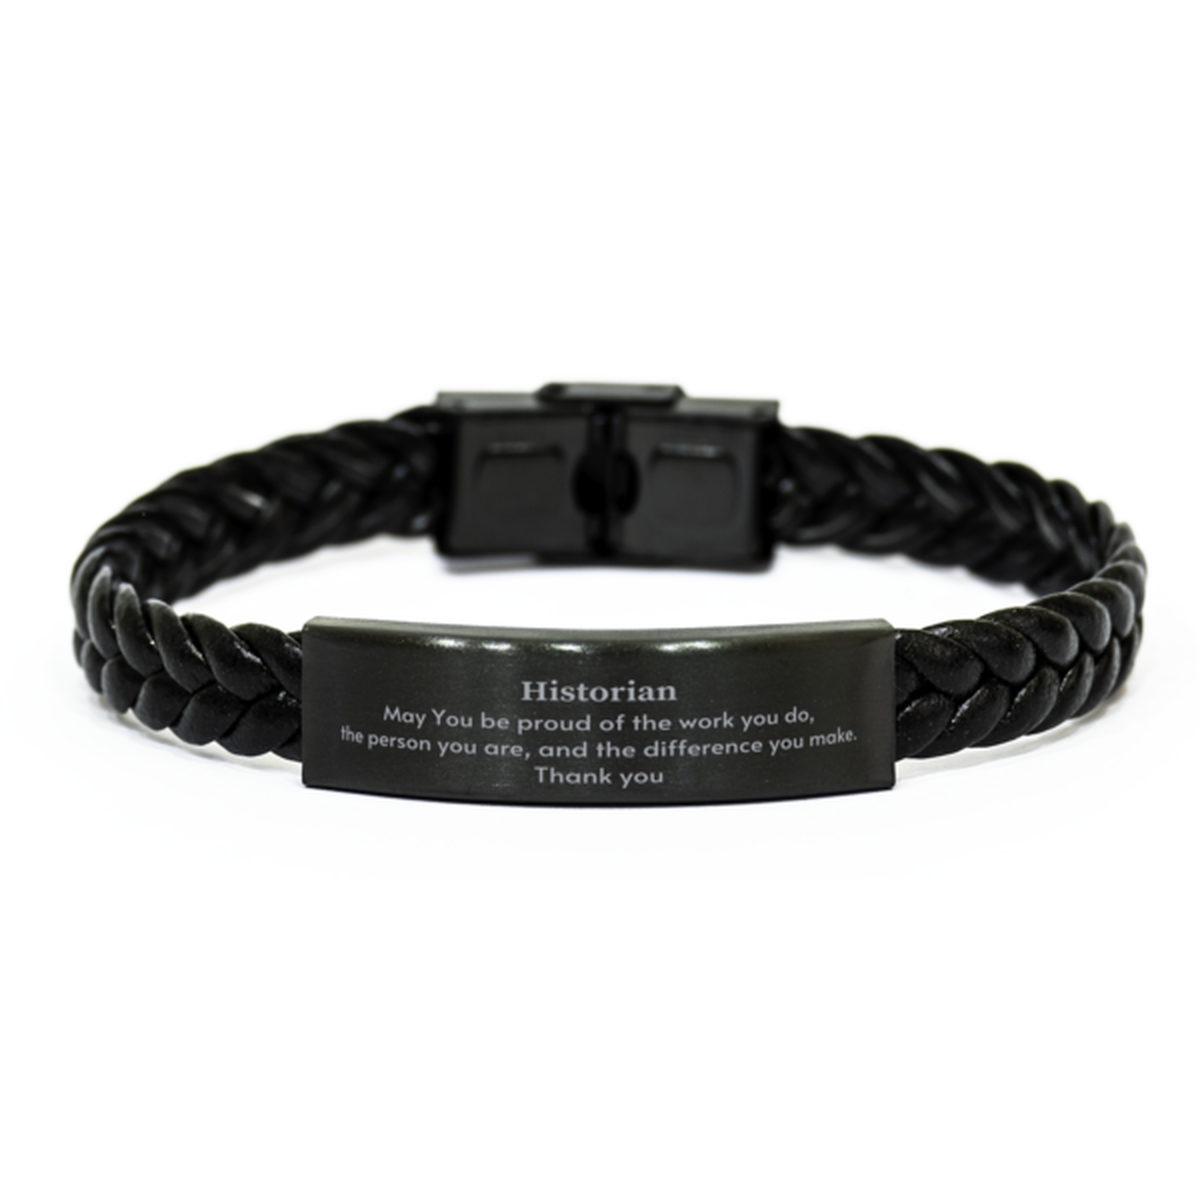 Heartwarming Braided Leather Bracelet Retirement Coworkers Gifts for Historian, Historian May You be proud of the work you do, the person you are Gifts for Boss Men Women Friends